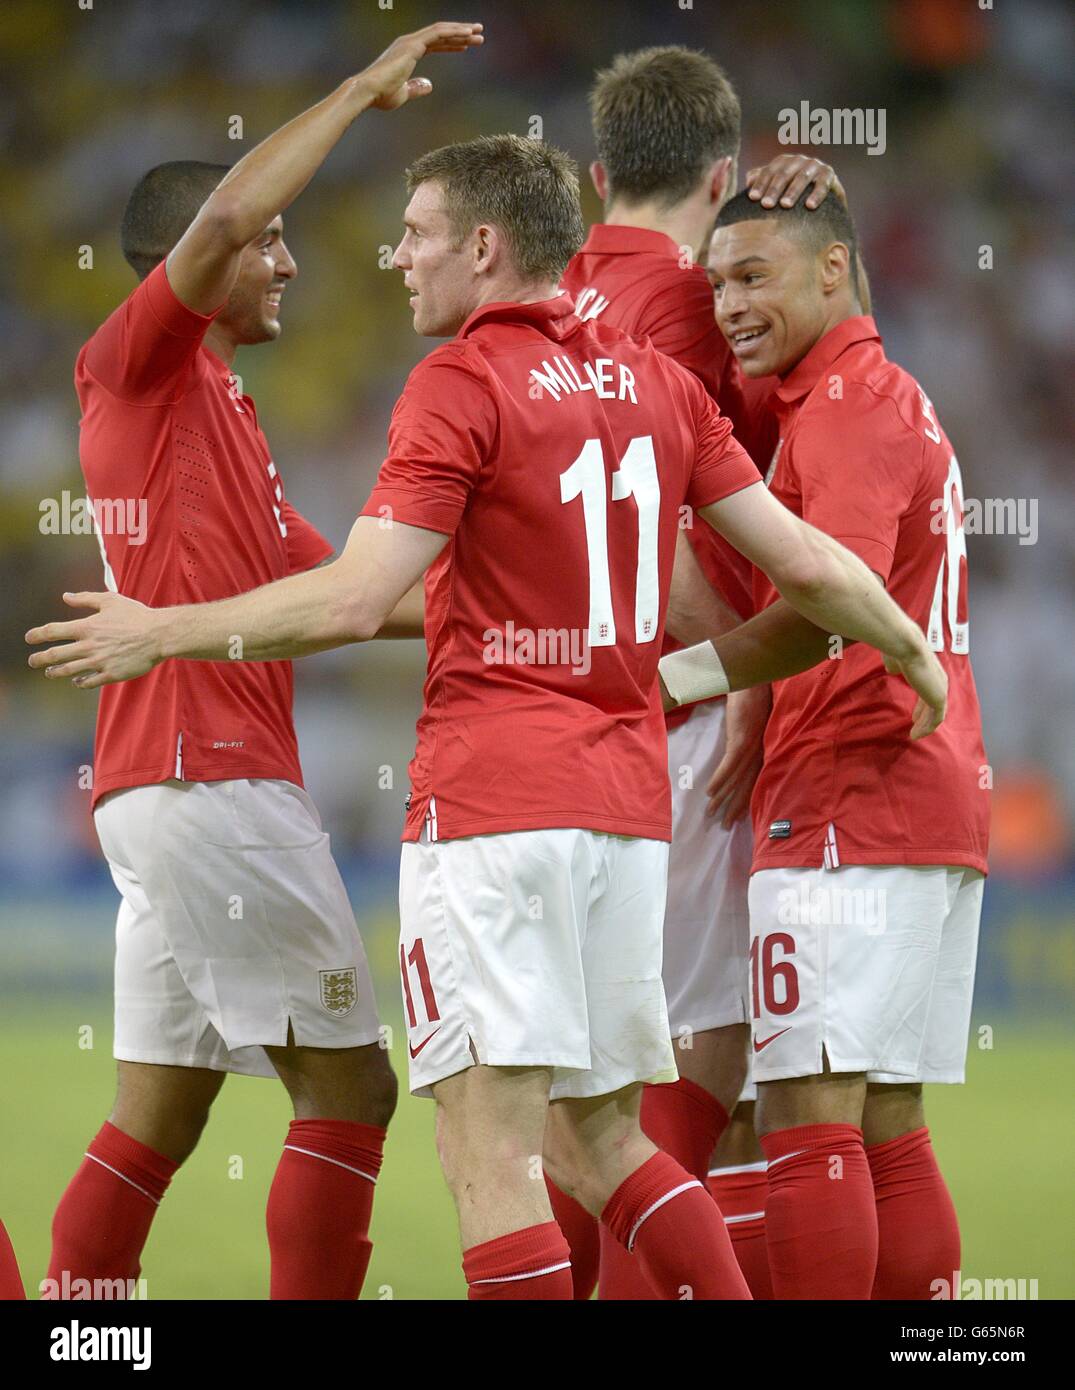 England's Alex Oxlade-Chamberlain (right) celebrates scoring their first goal of the game with team-mates Stock Photo